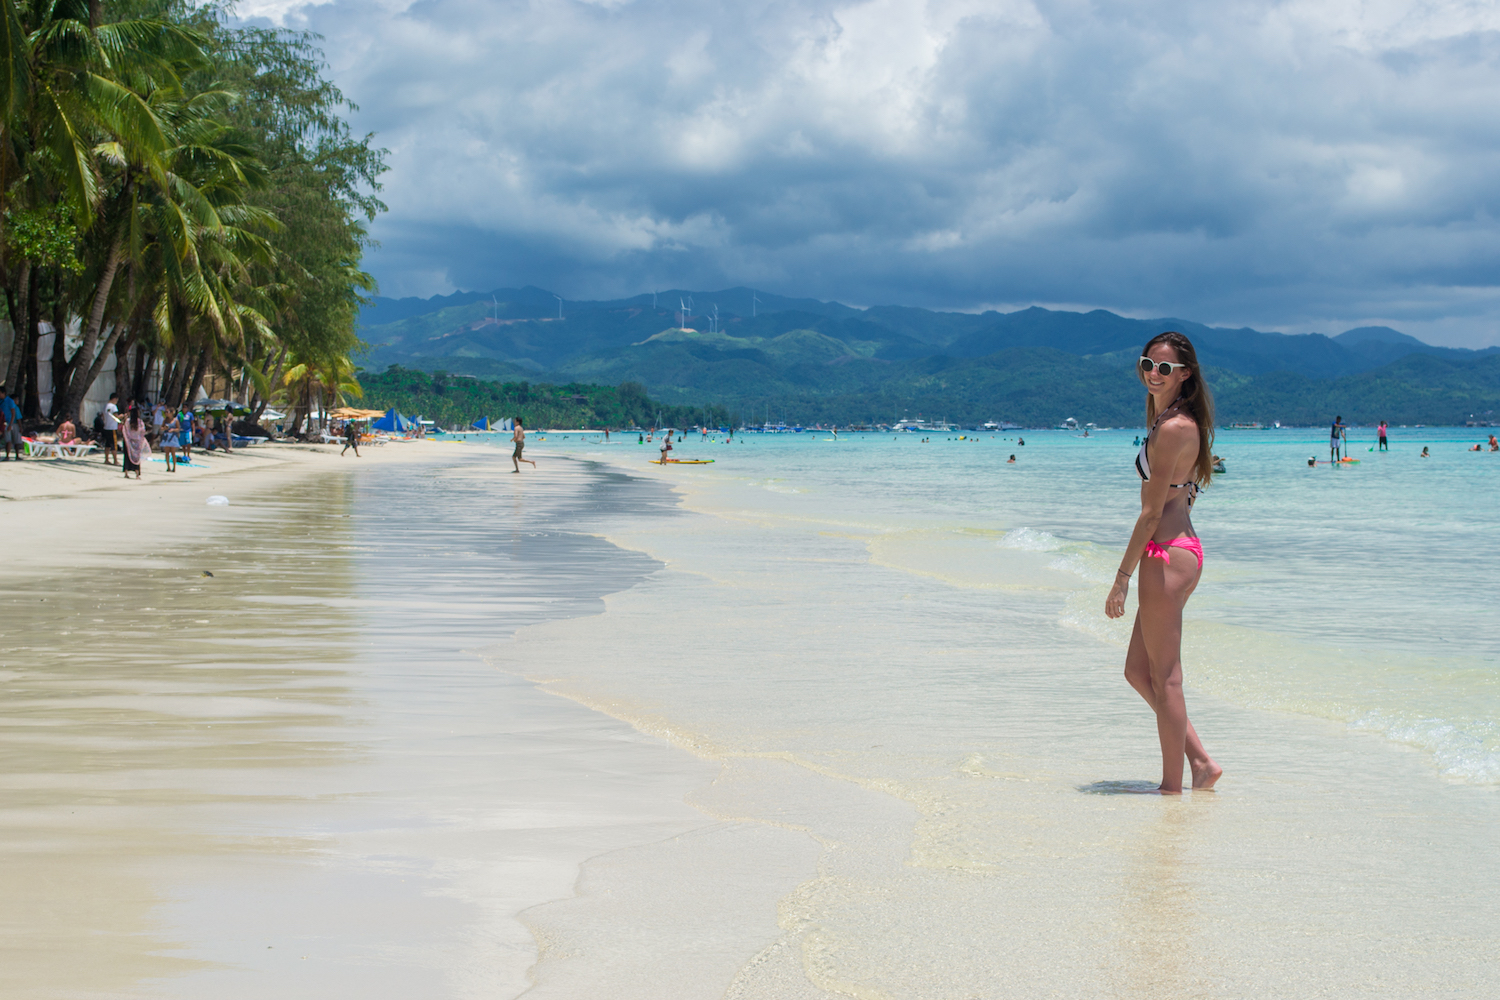 The famous white beach in Boracay the Philippines.